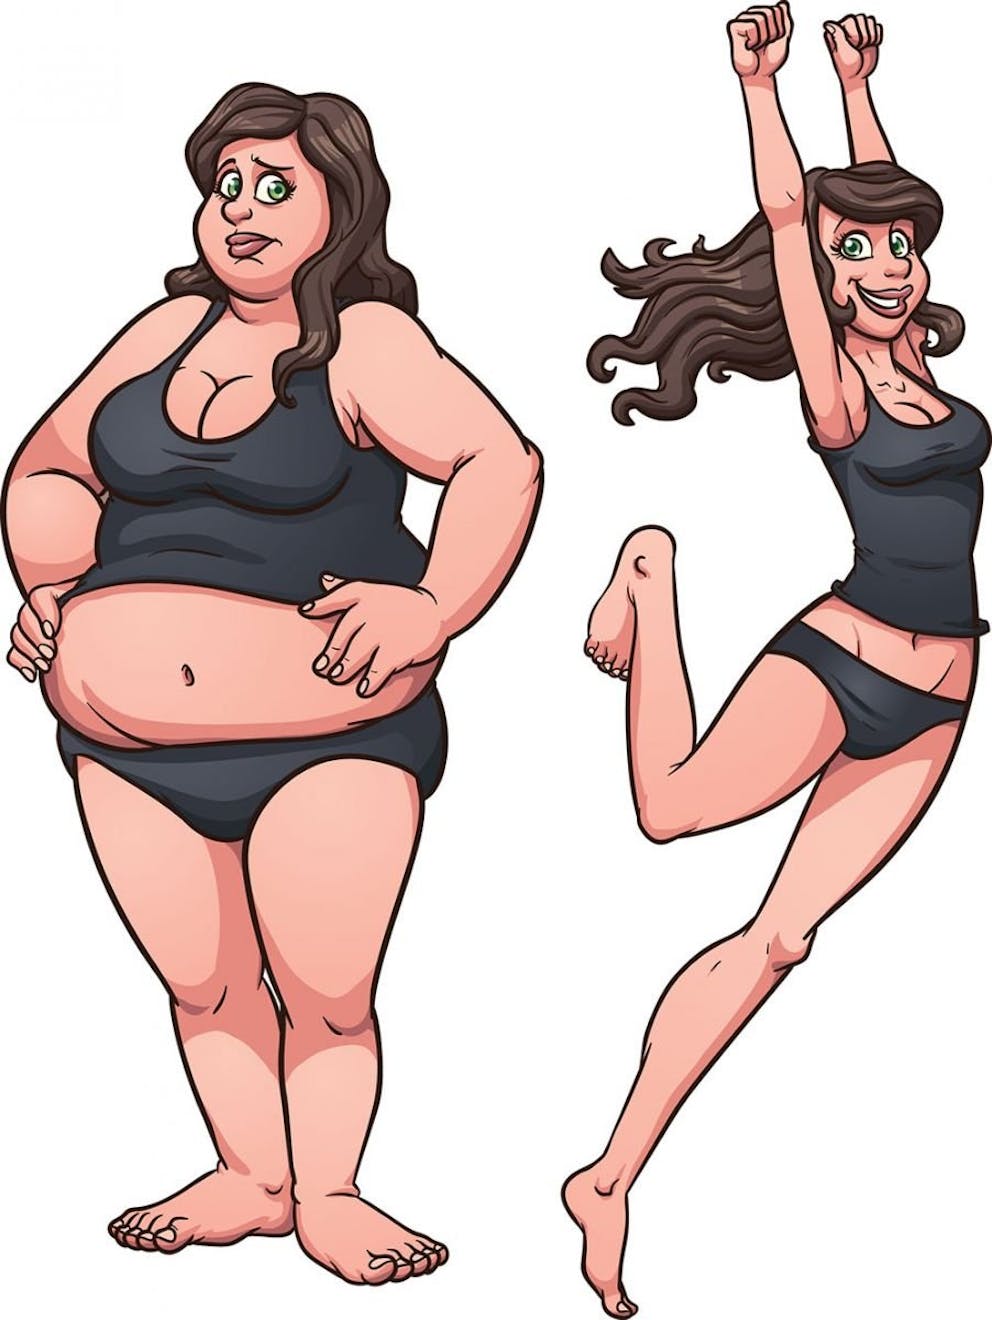 a drawing of a woman when she’s fat then thin